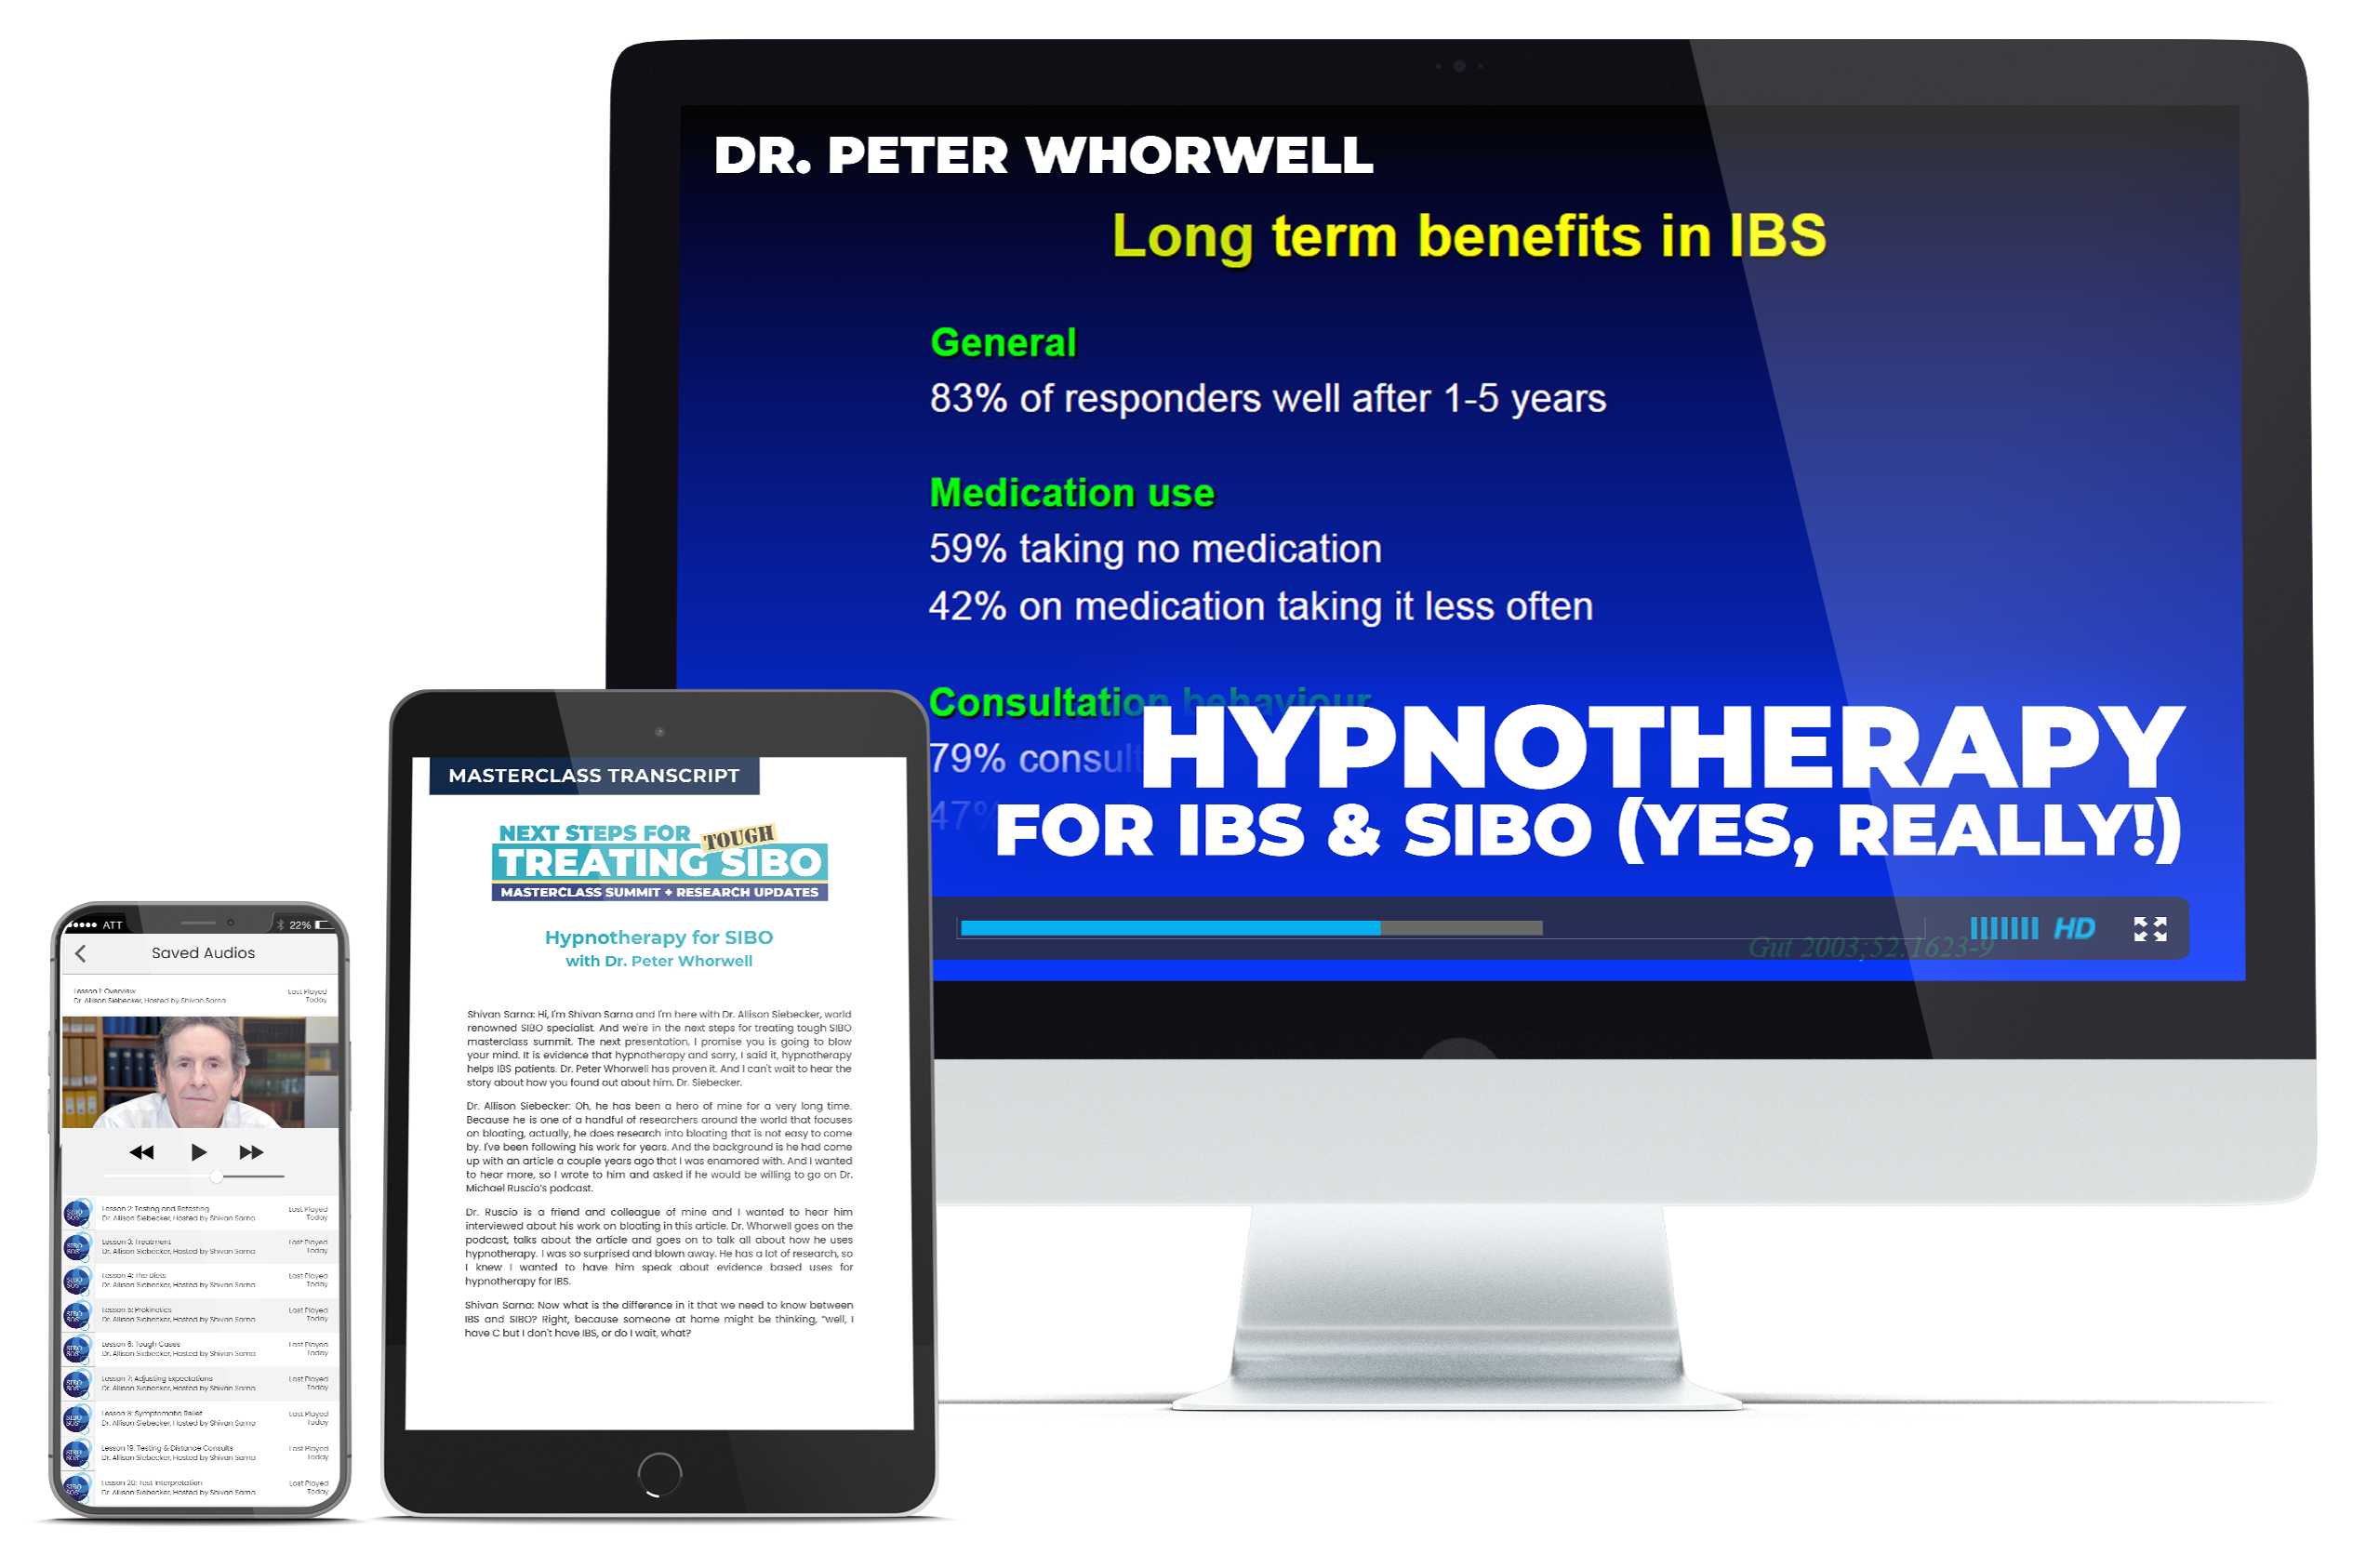 Using Hypnotherapy to Treat IBS and SIBO (Yes, Really!) with Dr. Peter Whorwell ​​